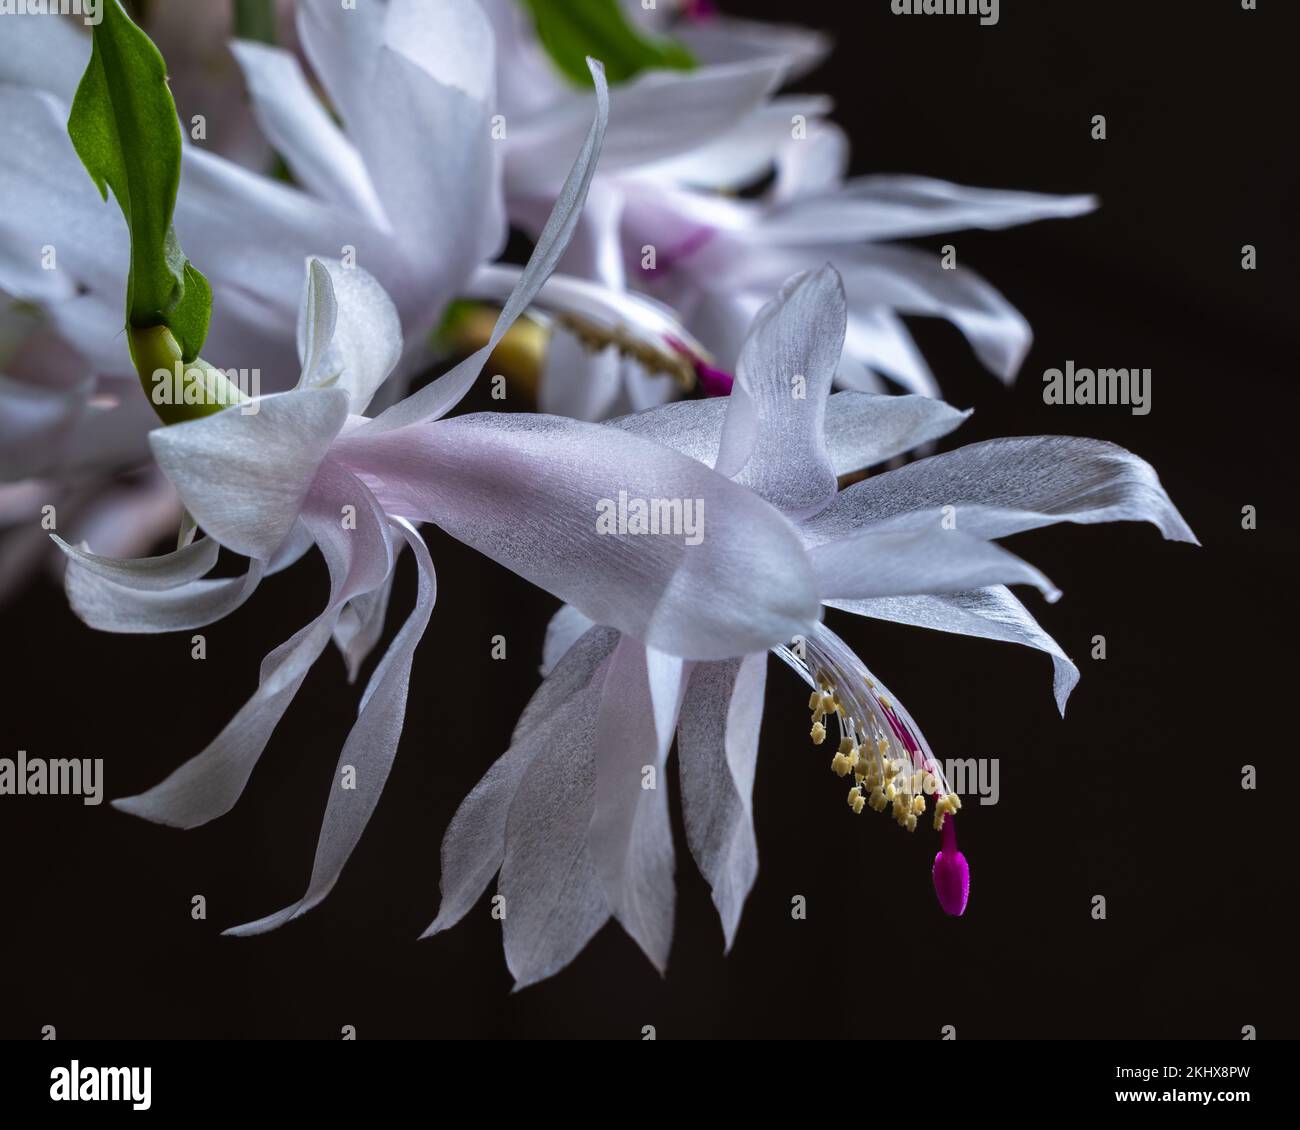 Closeup view of bright white and light pink flower of schlumbergera aka Christmas cactus or Thanksgiving cactus blooming indoors on dark background Stock Photo